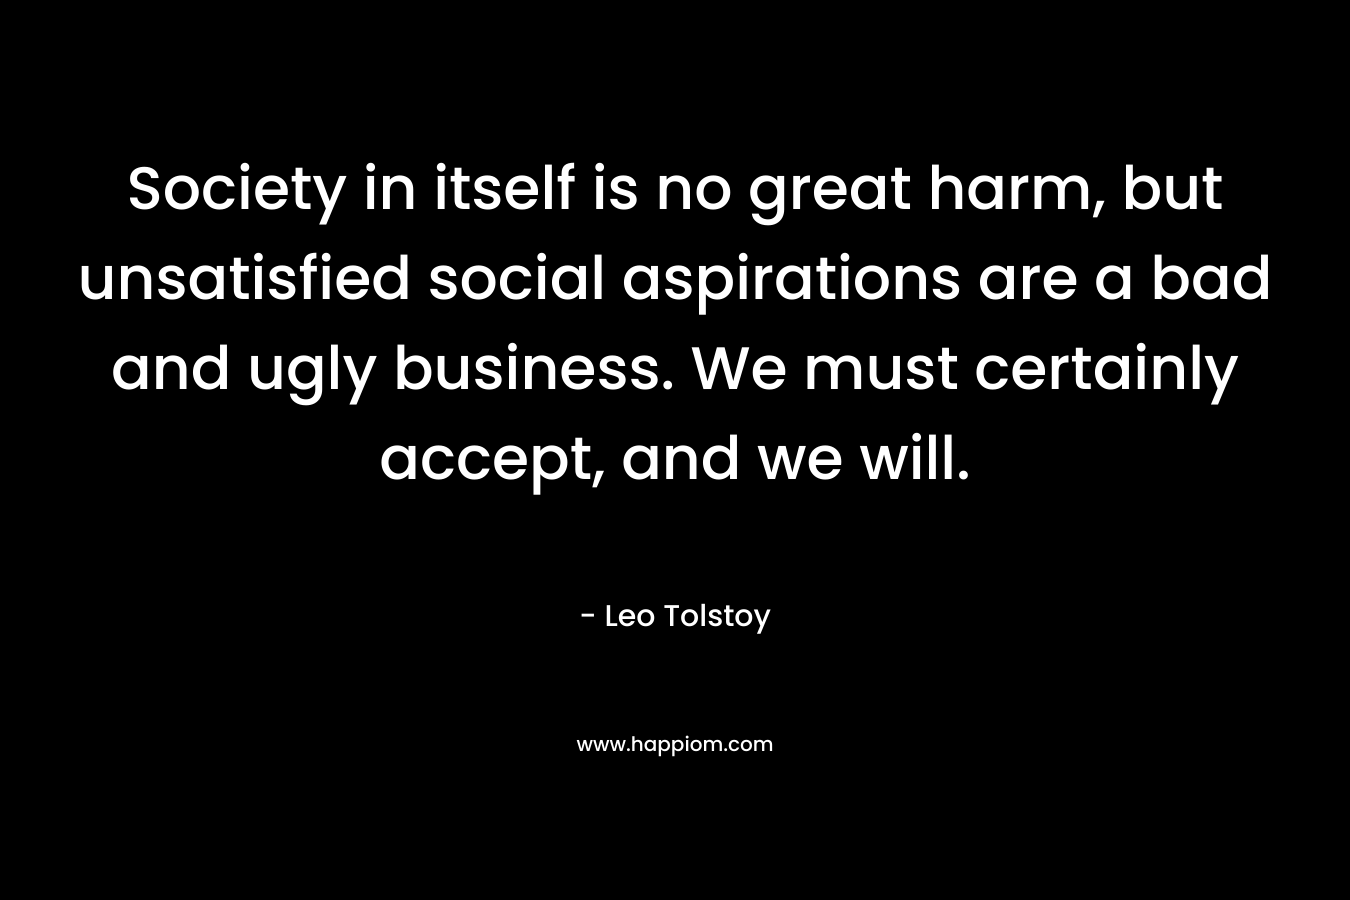 Society in itself is no great harm, but unsatisfied social aspirations are a bad and ugly business. We must certainly accept, and we will. – Leo Tolstoy